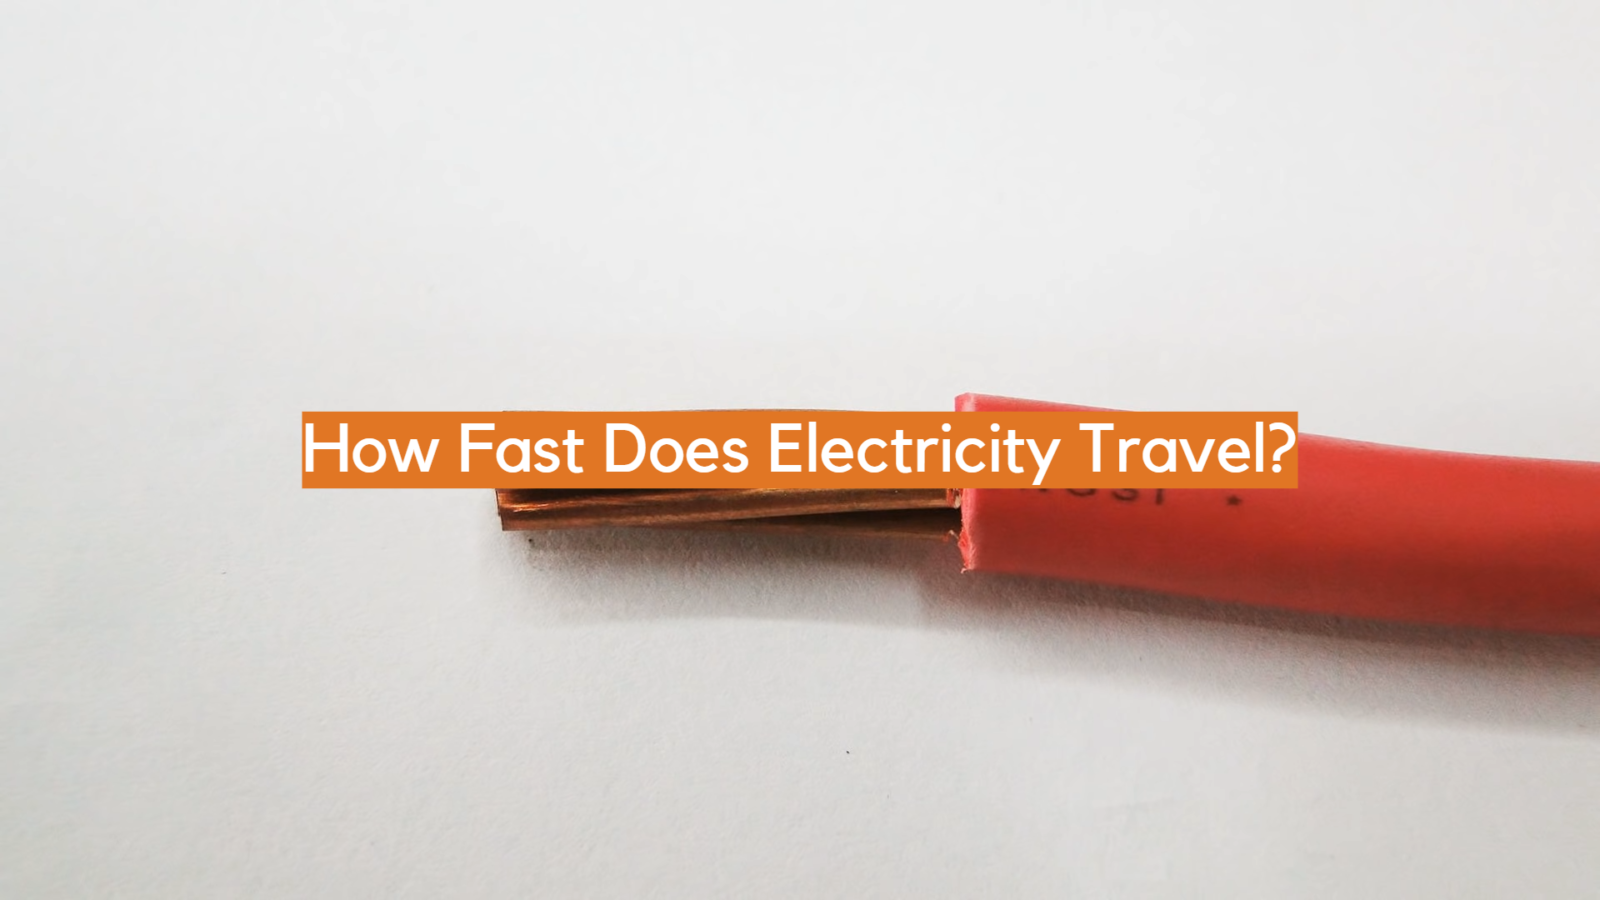 How Fast Does Electricity Travel?